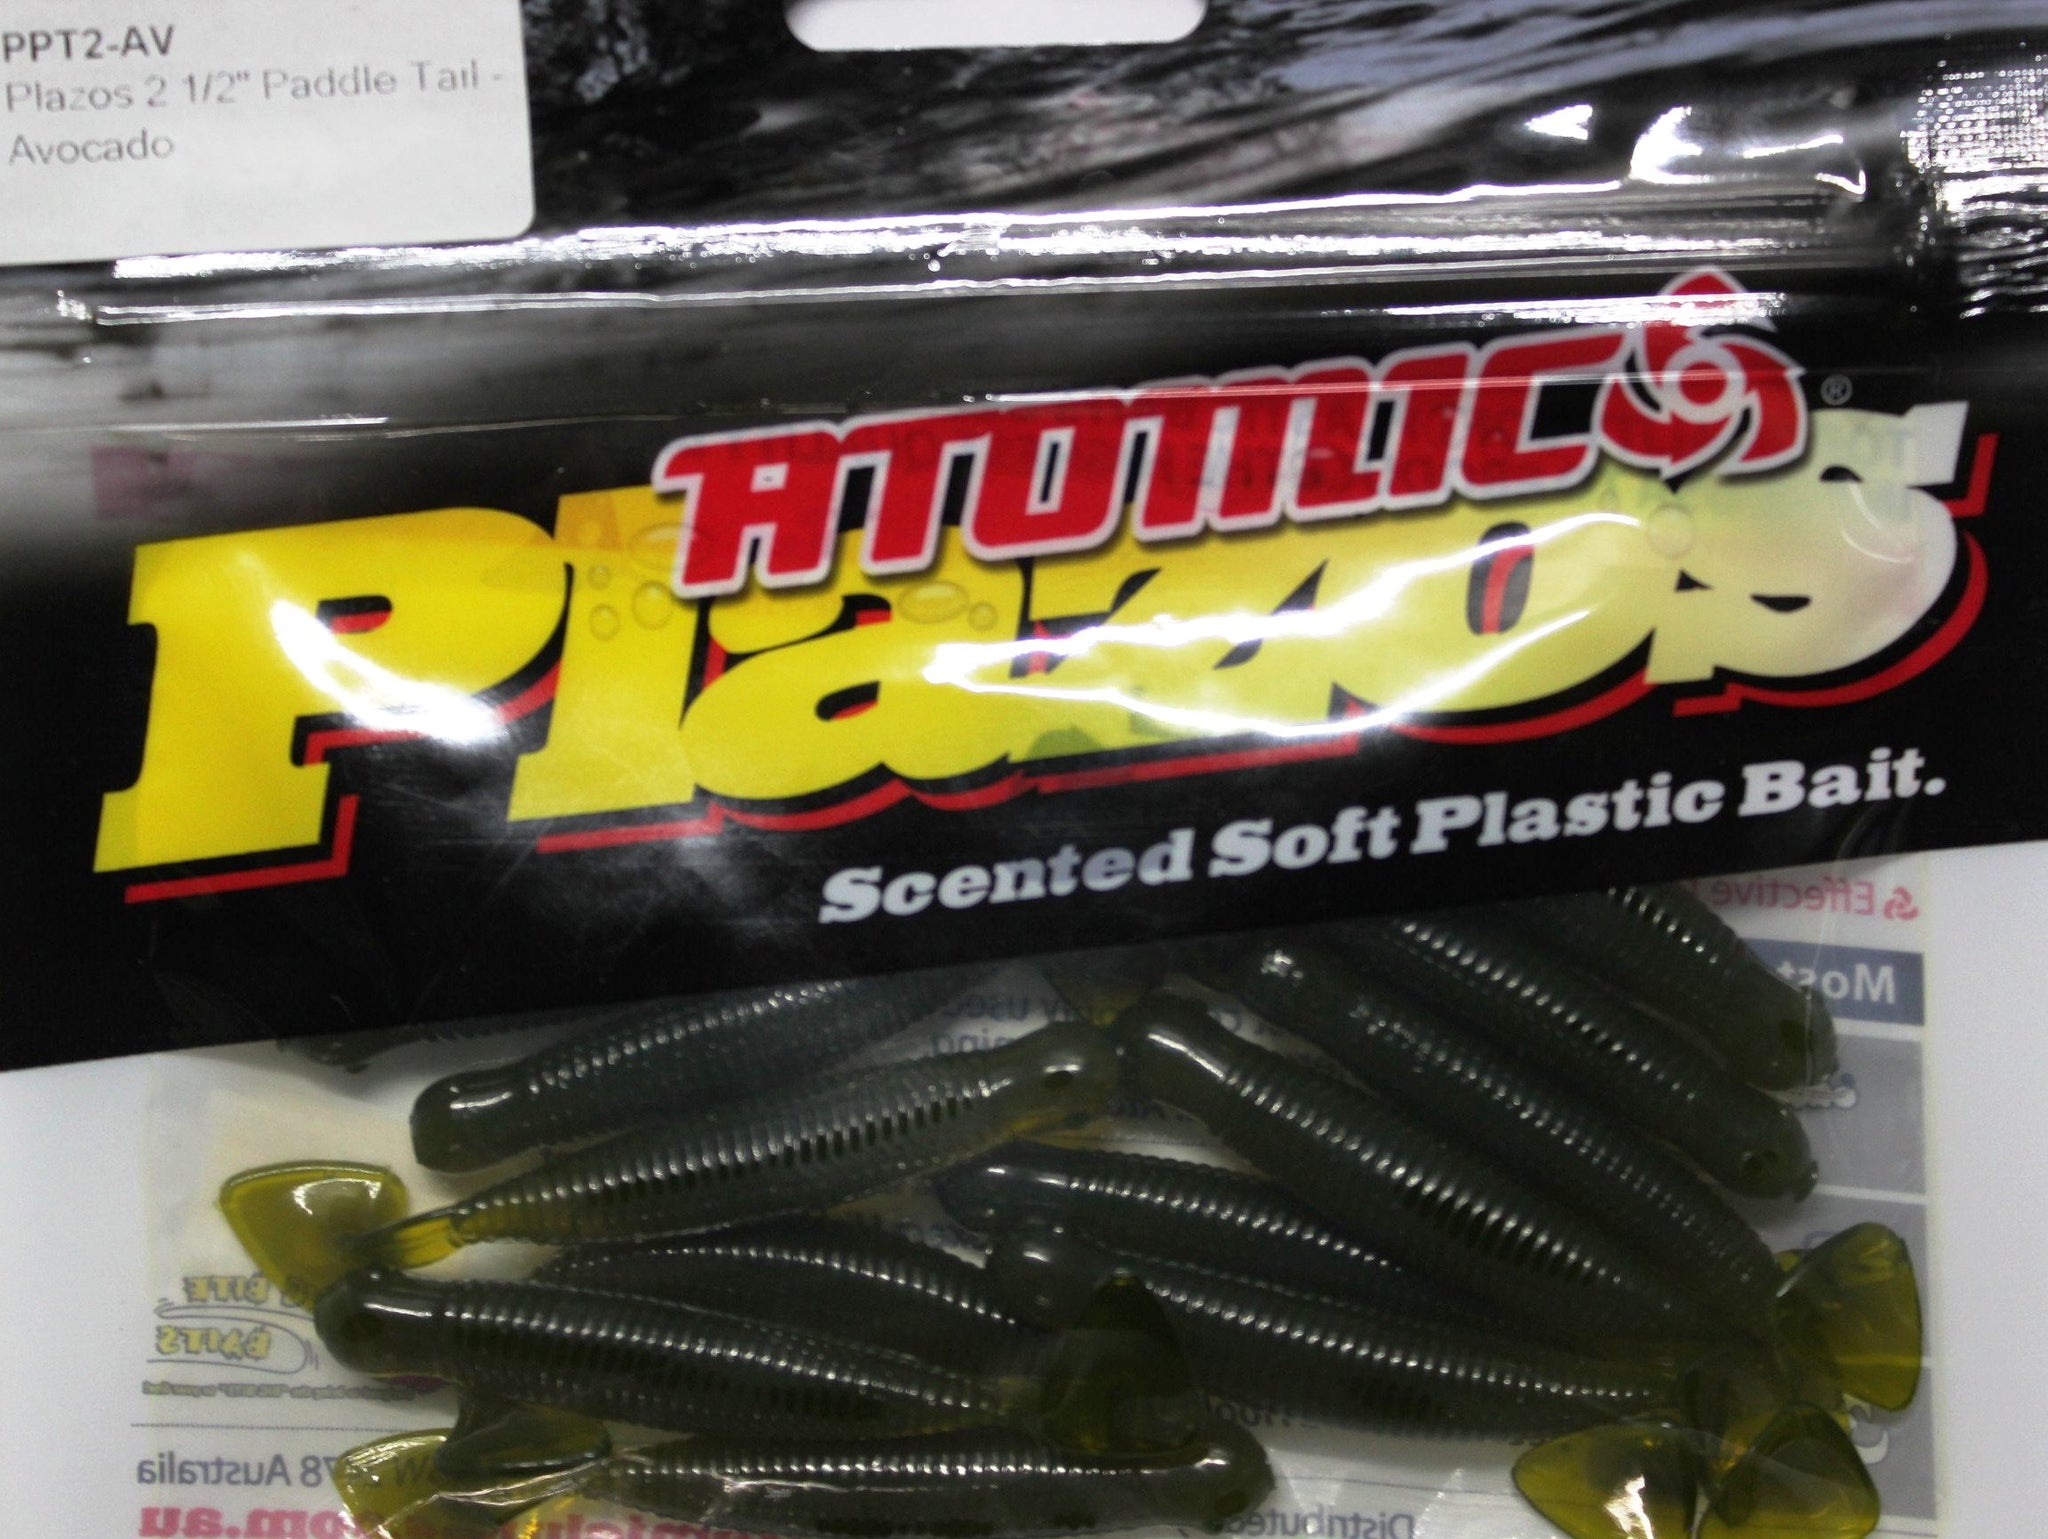 Atomic Plazos Scented Soft Plastic Bait 2 1/2 and 3 1/4 Paddle